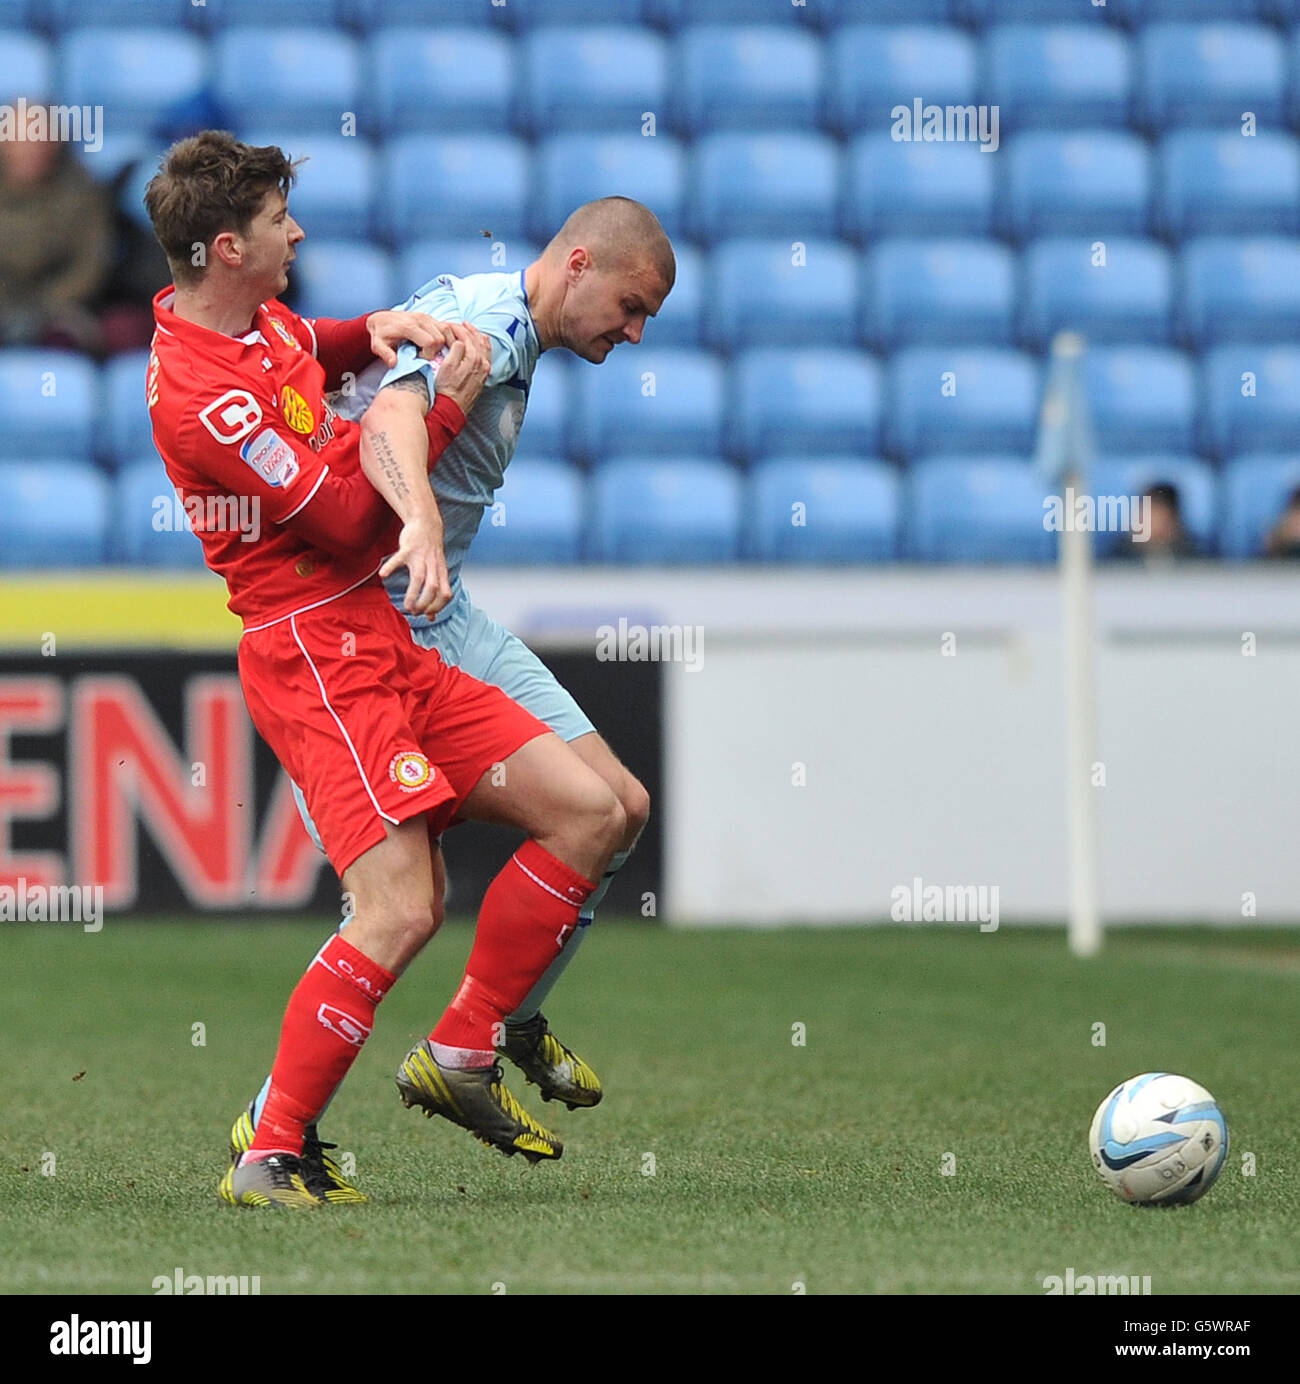 Coventry City's Carl Dickinson and Crewe Alexandra's Luke Murphy battle for the ball during the npower League One match at the Ricoh Arena, Coventry. Stock Photo